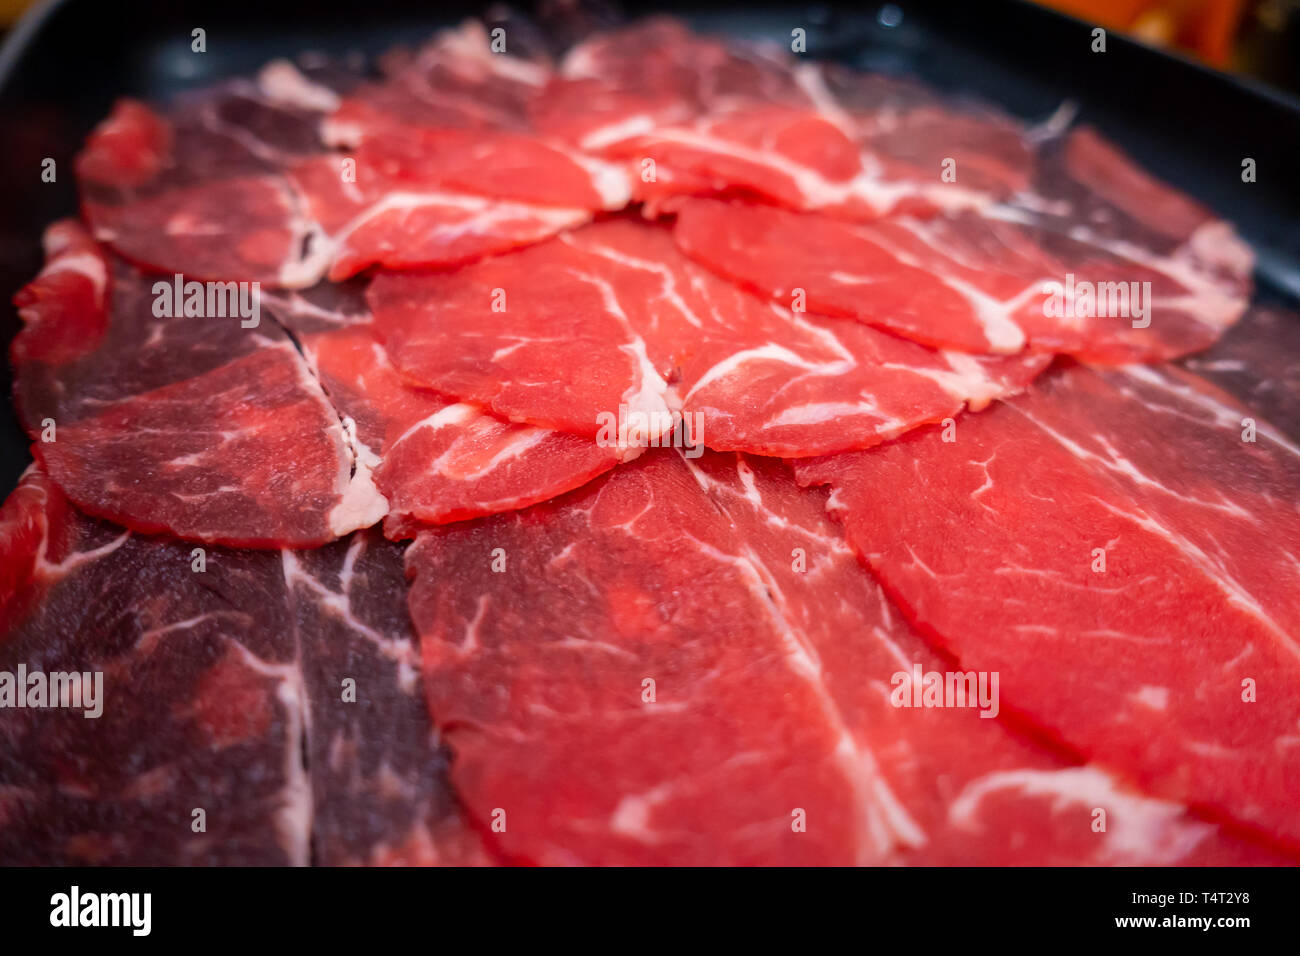 Thin sliced beef for Shabu hot pot meal Stock Photo